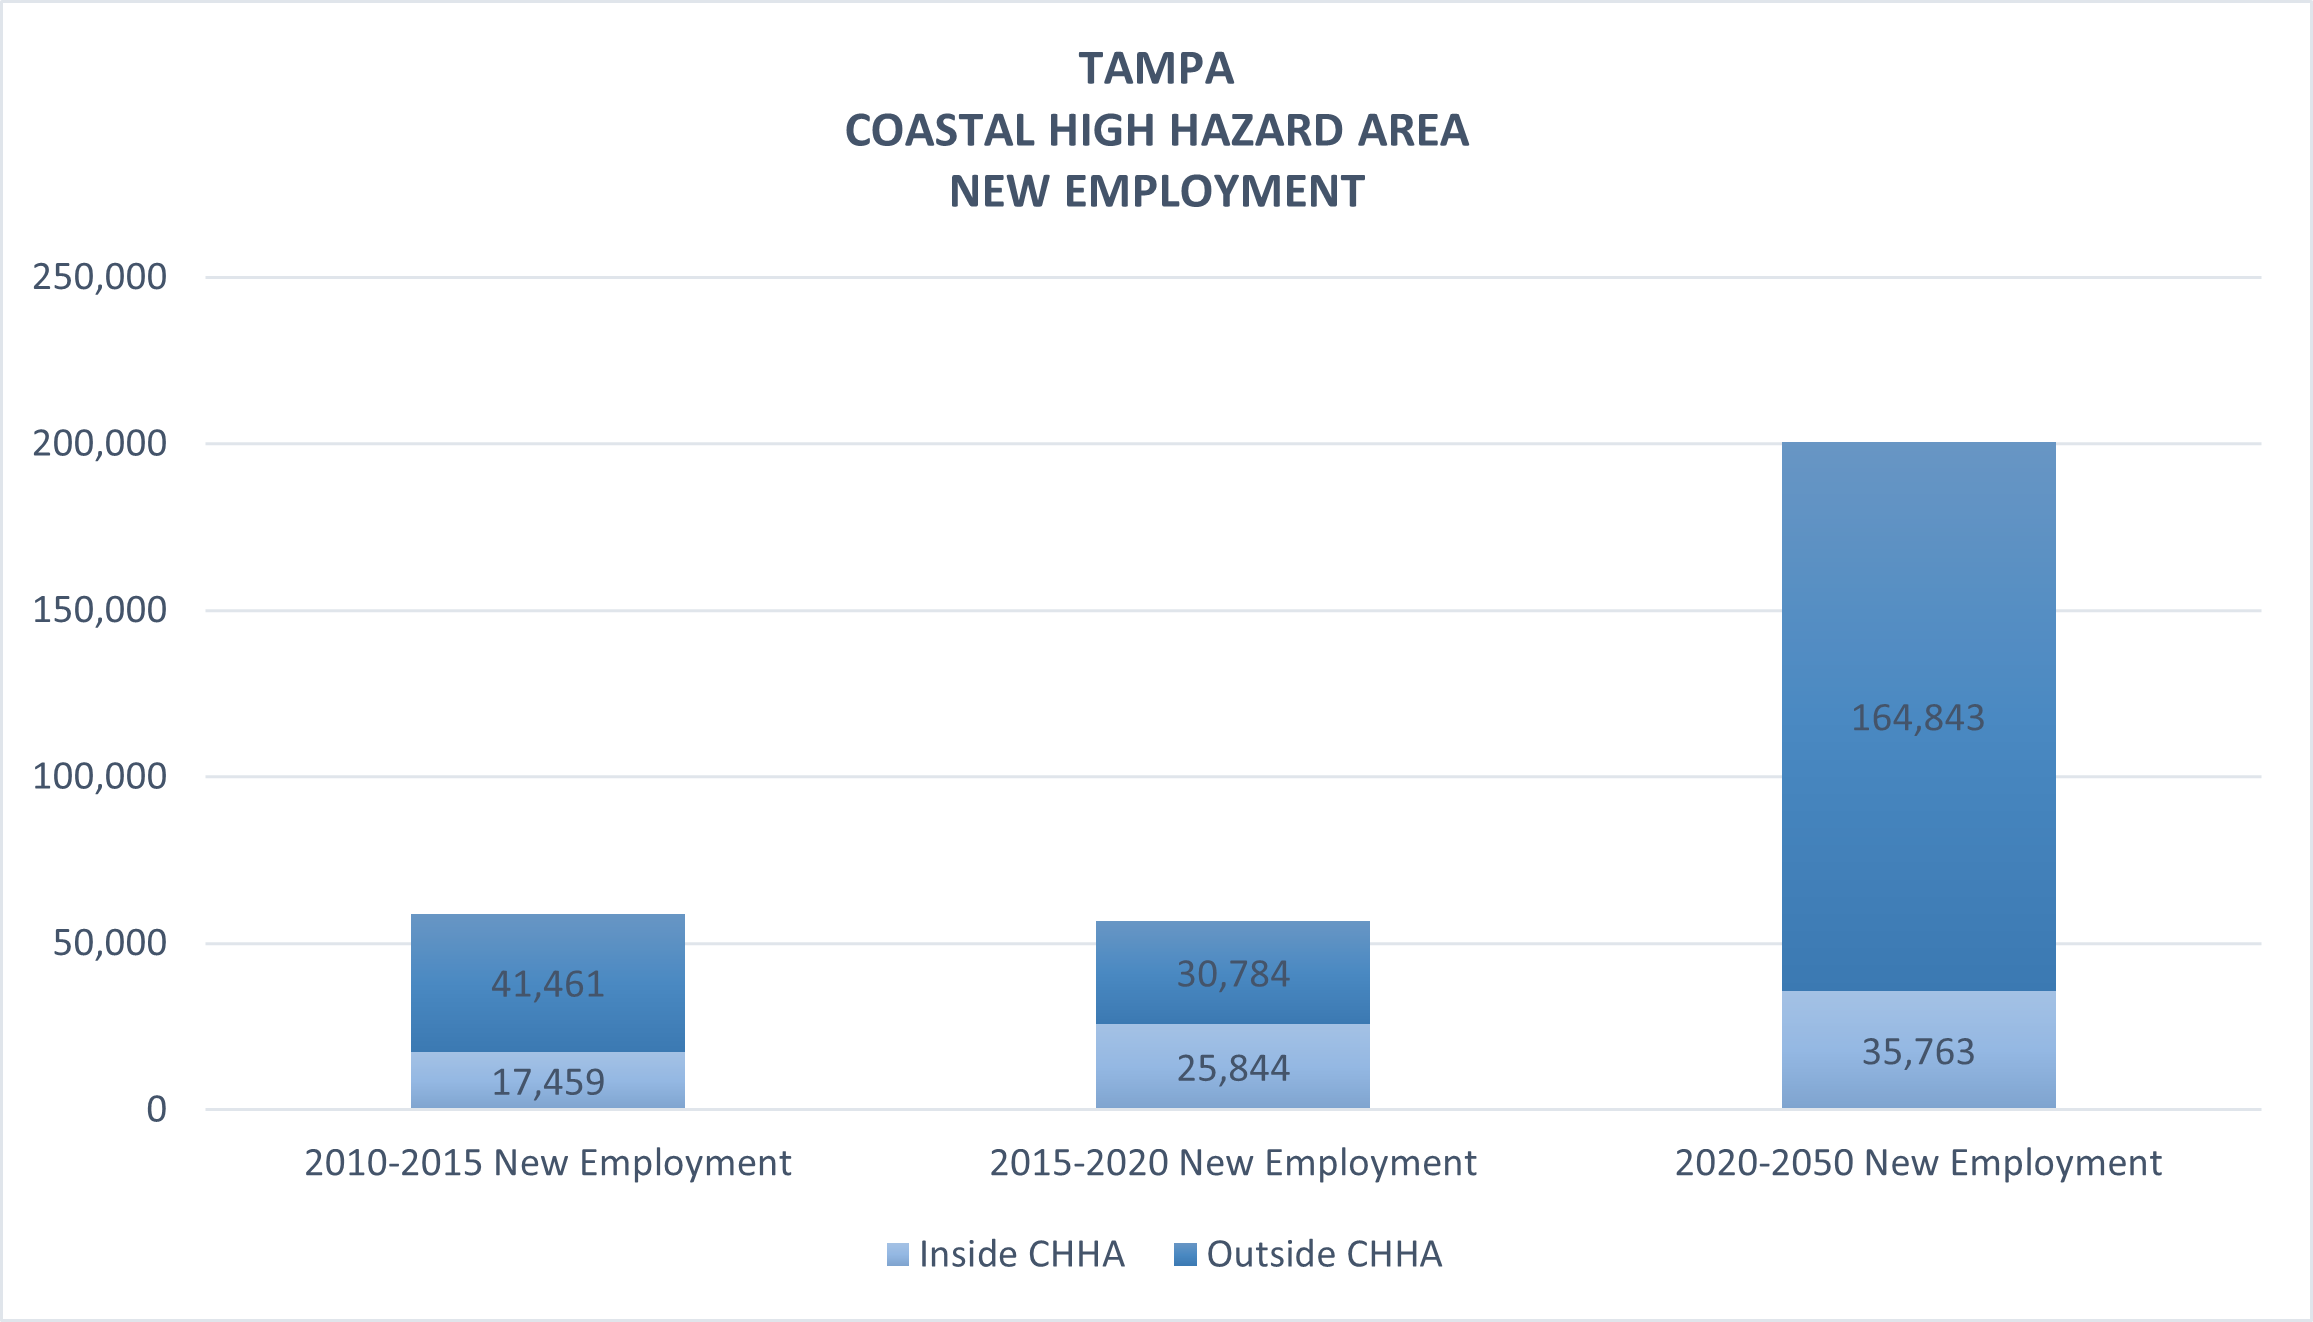 This chart shows Tampa' new jobs inside and outside the CHHA. From 2015 to 2020, 31,627 new jobs moved inside the CHHA and 87,860 new jobs moved outside CHHA. From 2020 to 2050, 60,605 new jobs are expected to move inside the CHHA and 372,309 new jobs are expected to move outside the CHHA.